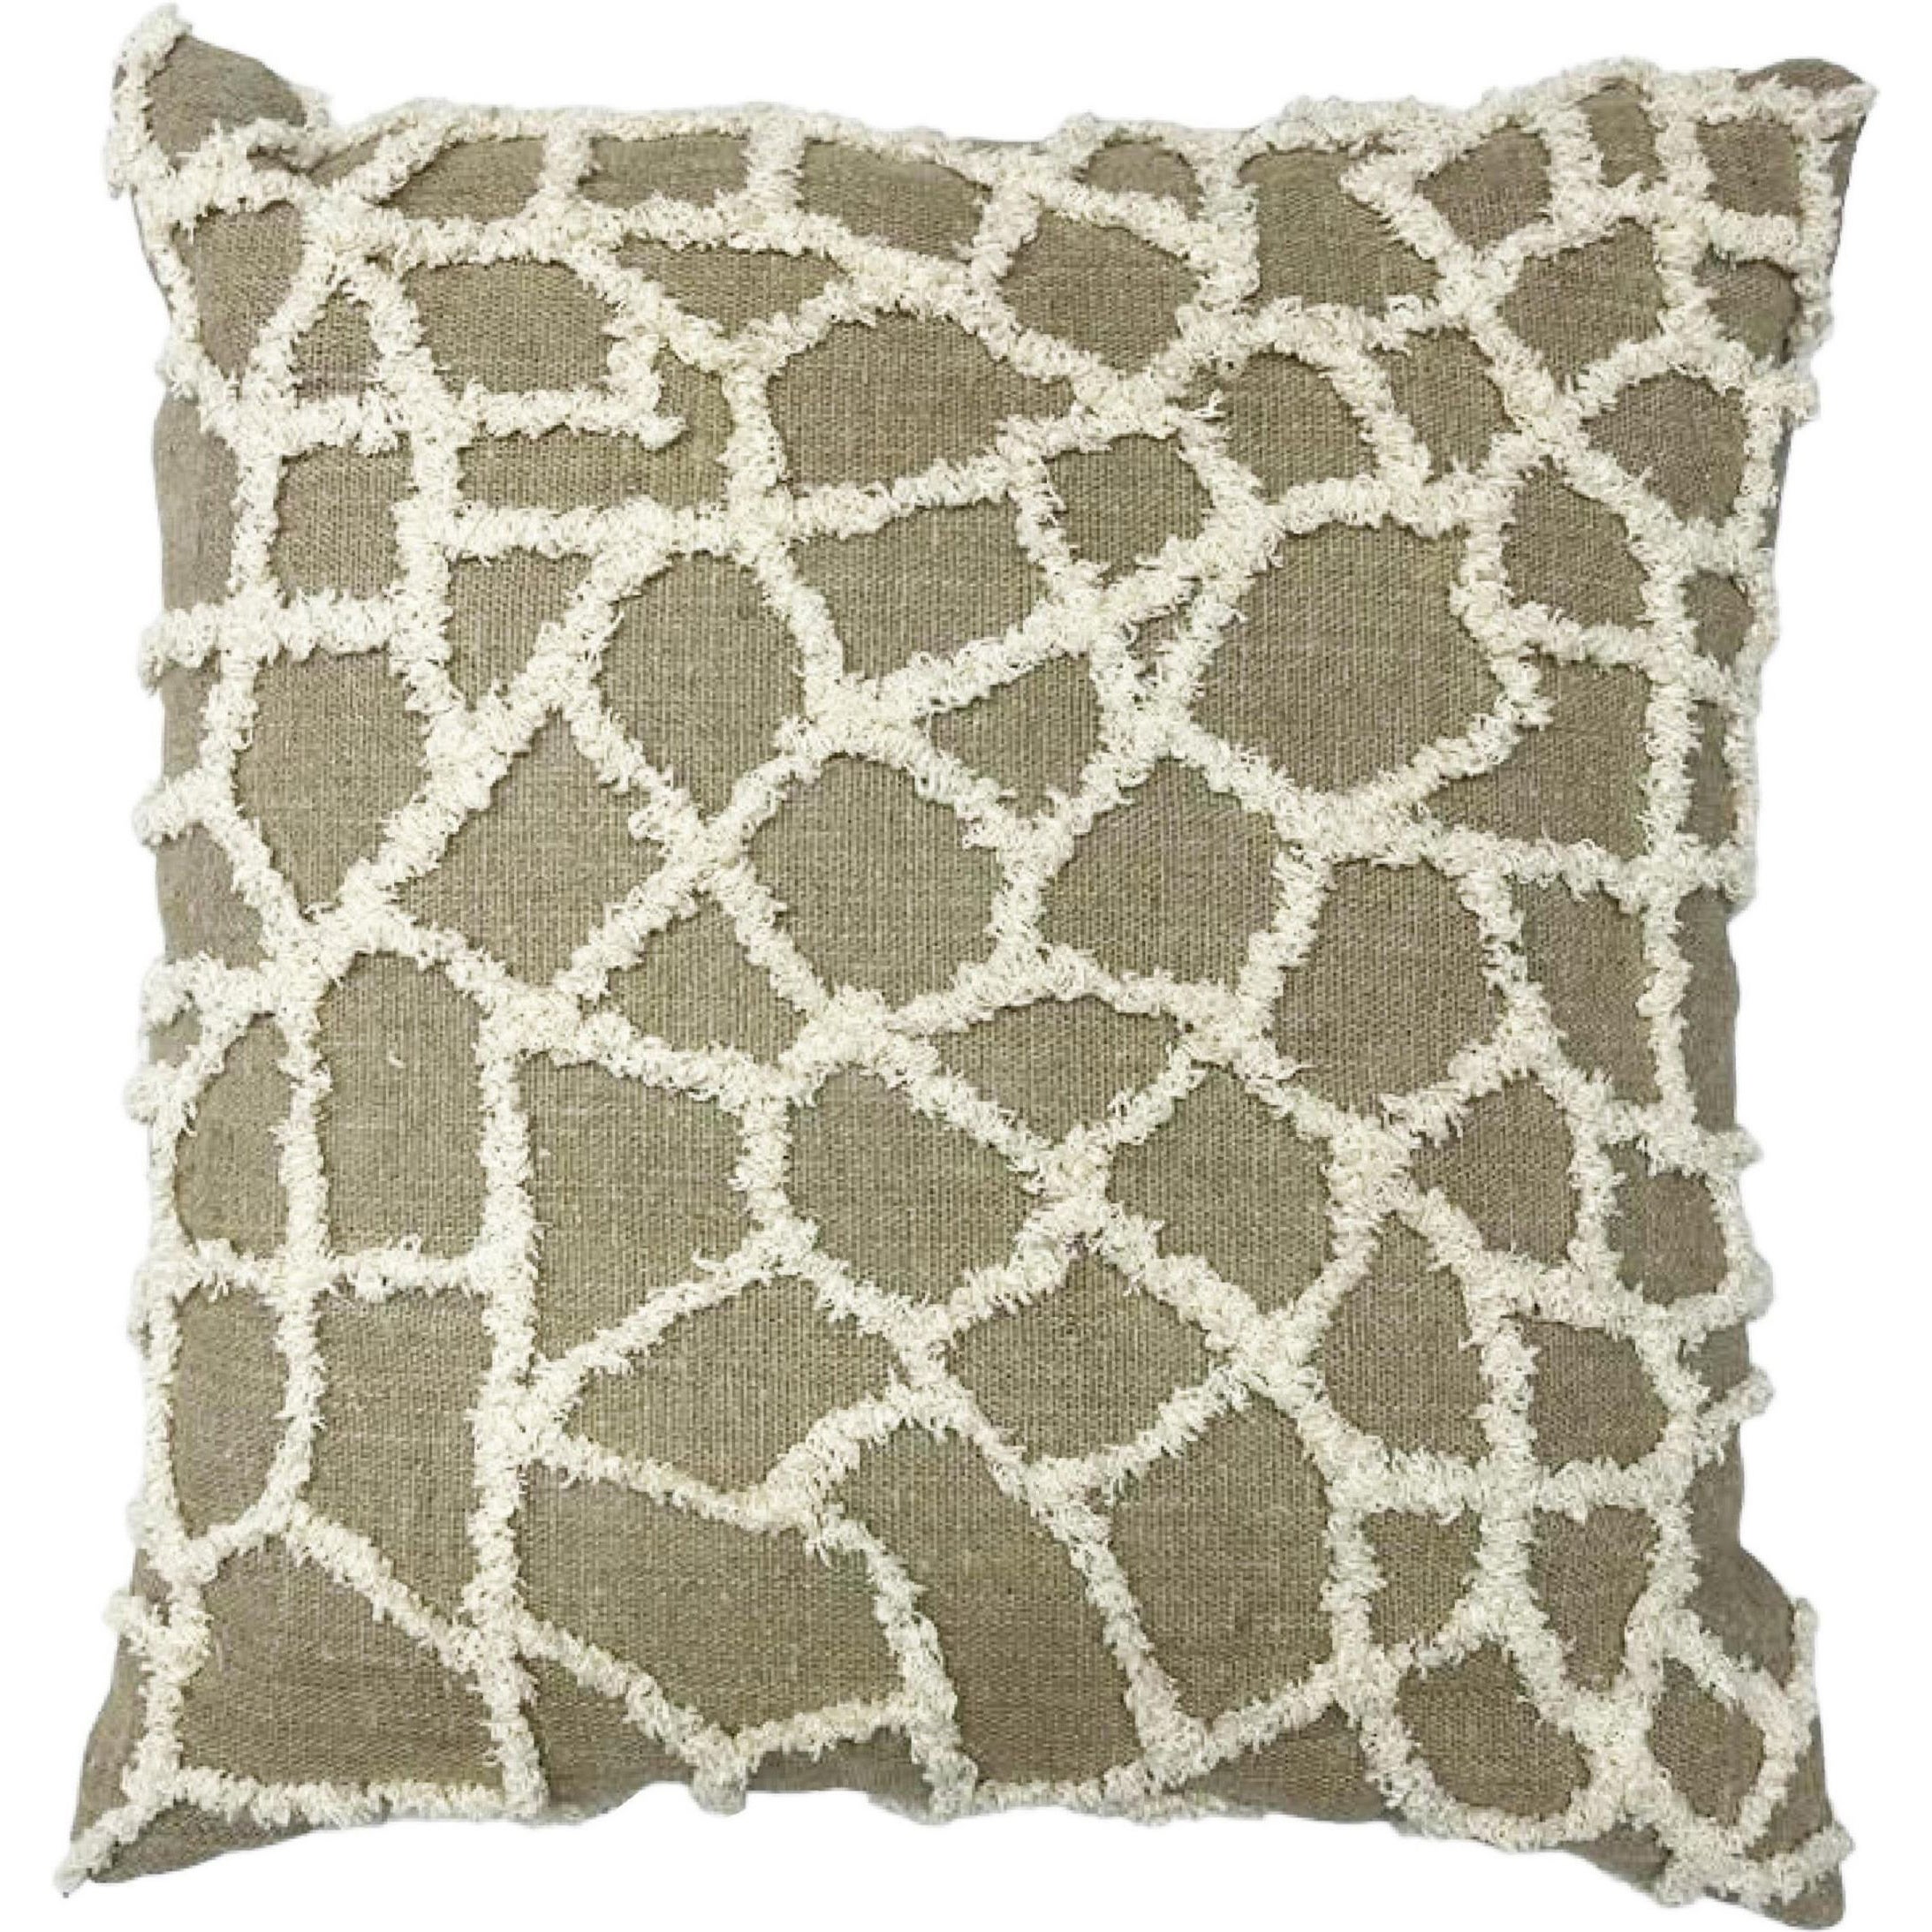 Boho Chic Style Modern Wool and Cotton Pillow In Taupe Color For Sale